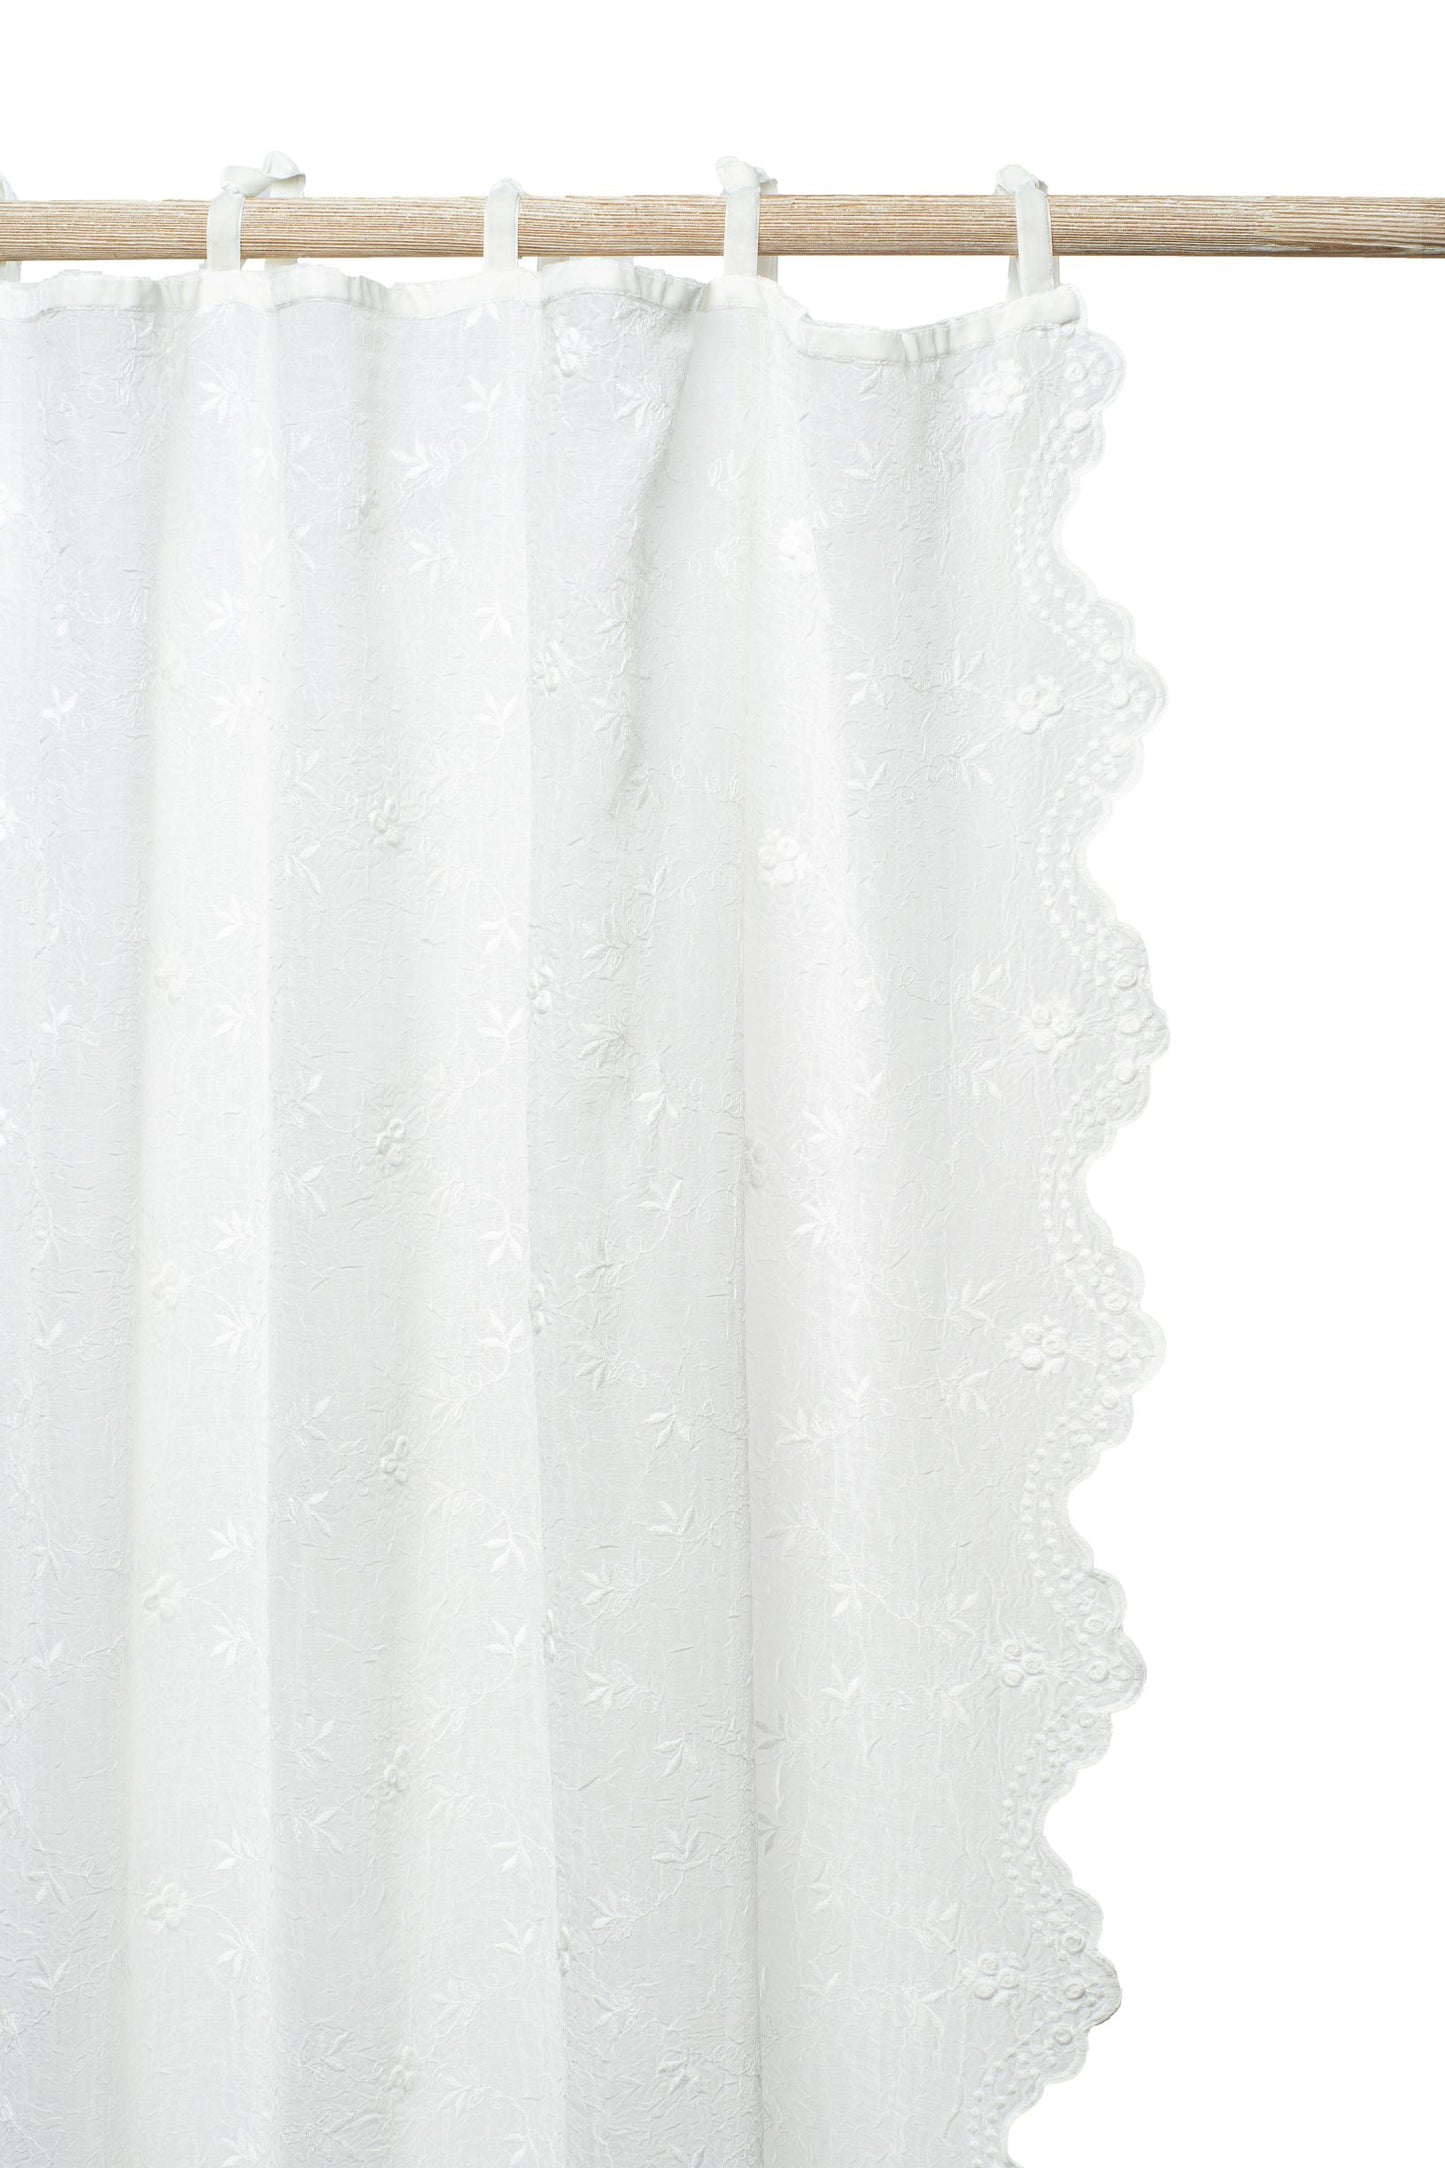 Close-up of delicate embroidery detail on a luxurious voile panel.